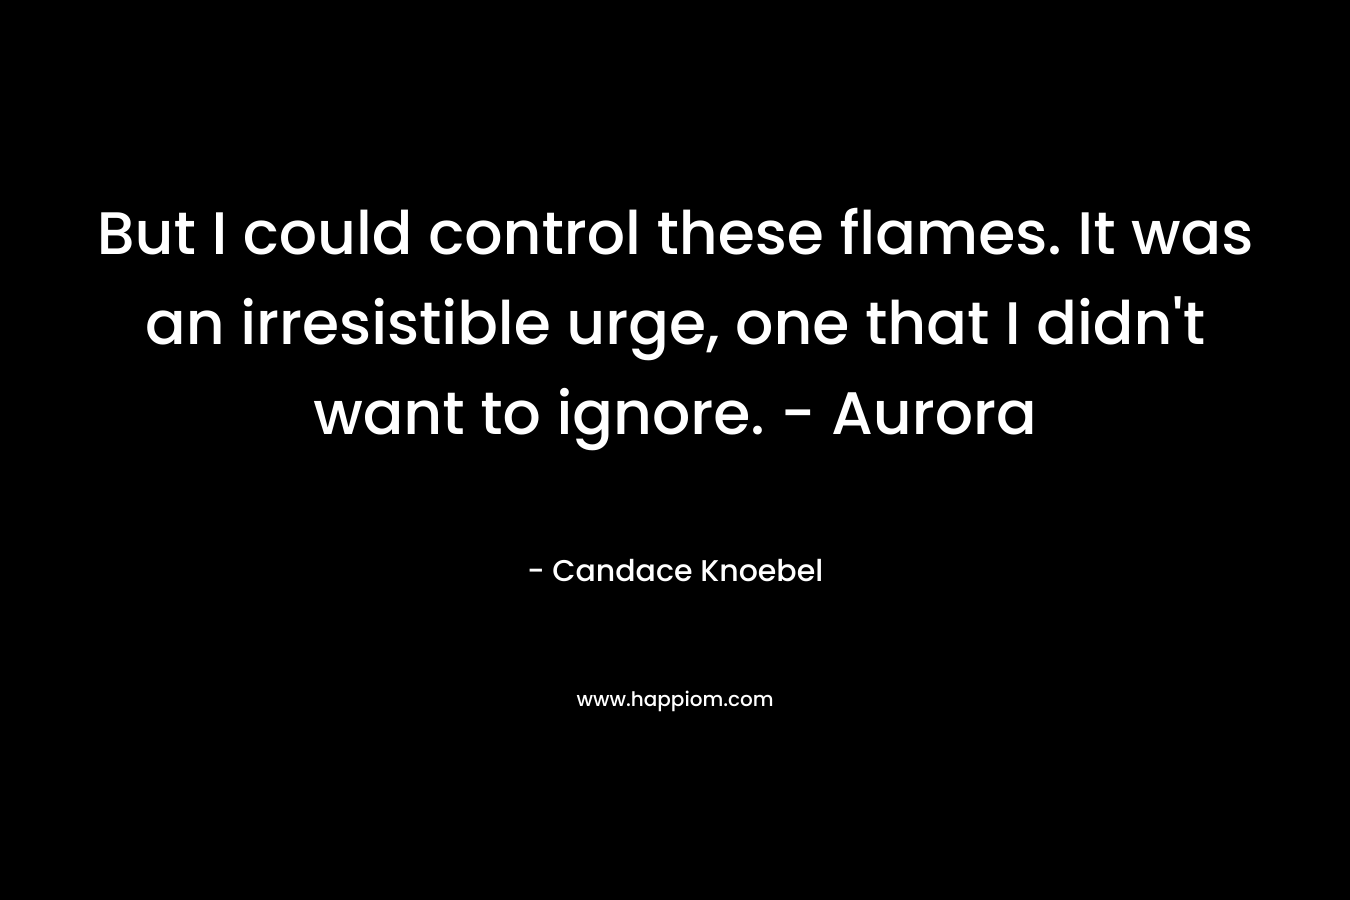 But I could control these flames. It was an irresistible urge, one that I didn't want to ignore. - Aurora